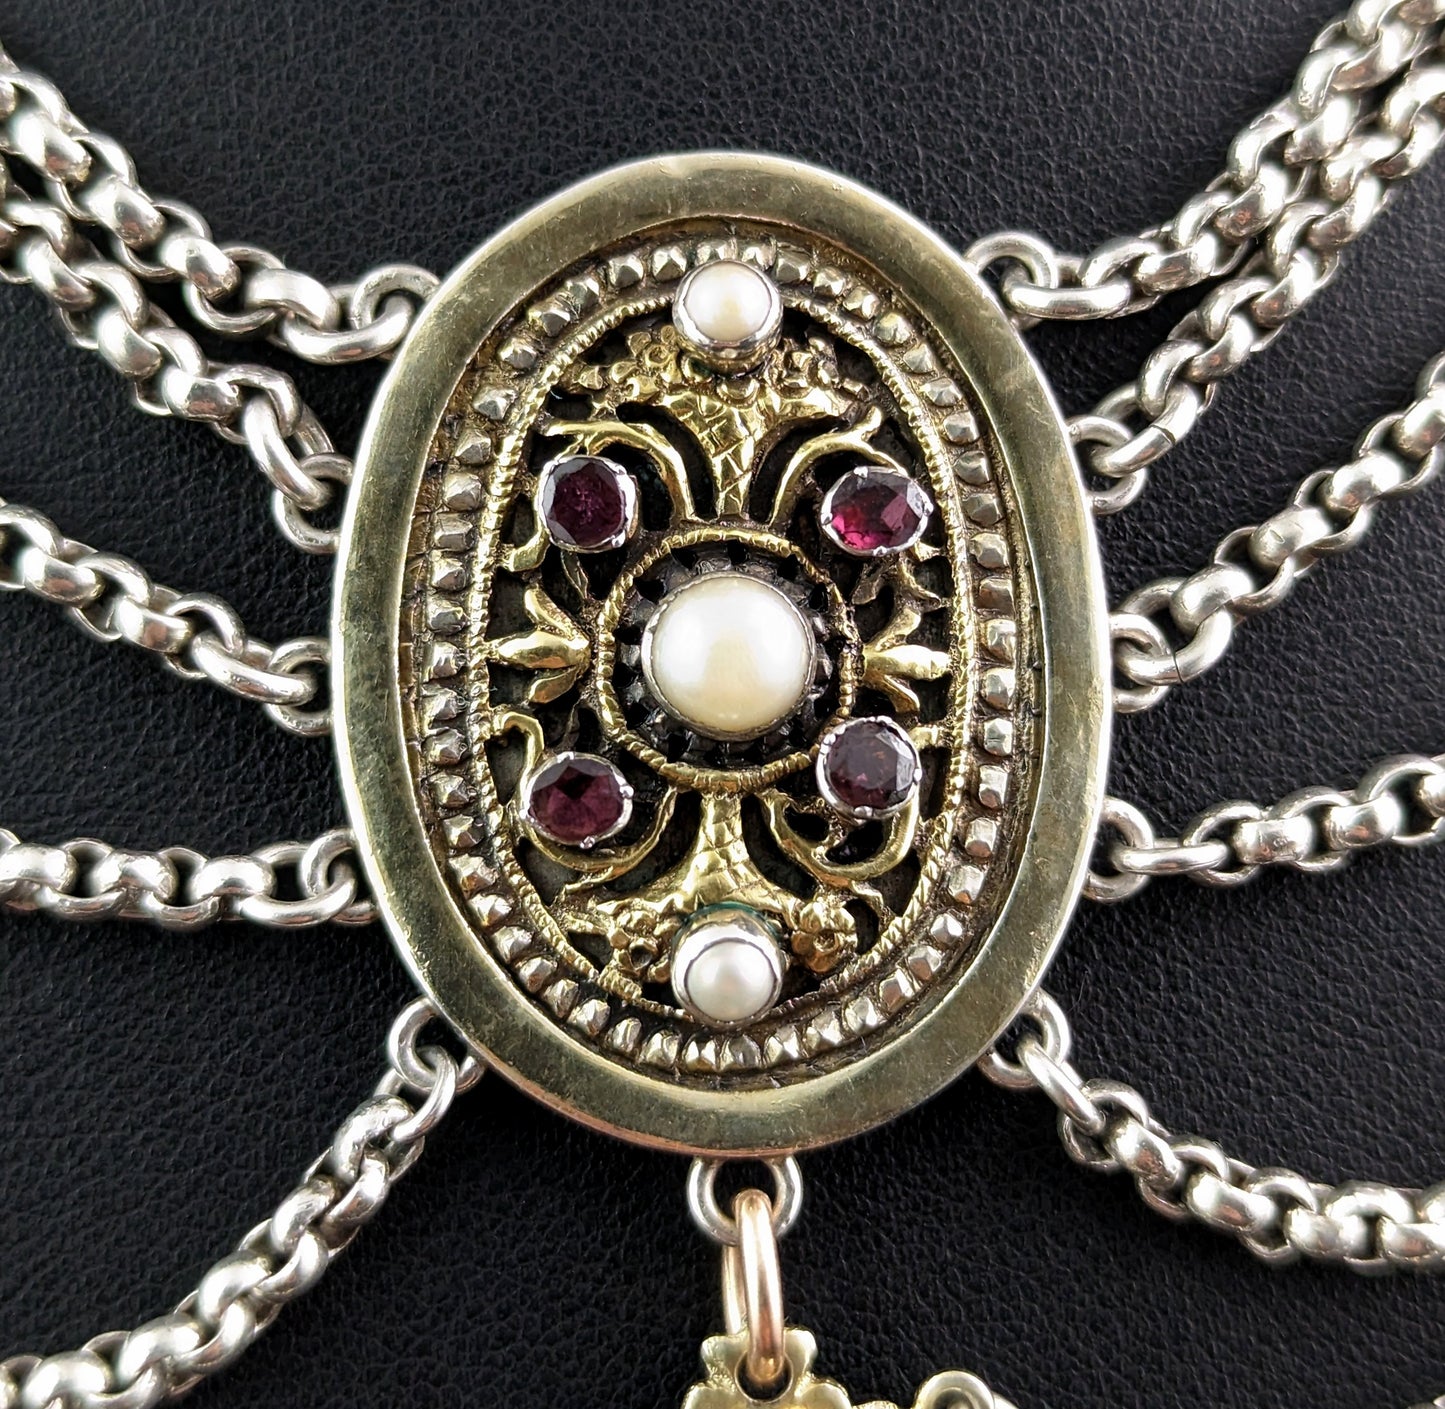 Antique Austro-Hungarian festoon necklace, Garnet, Pearl and Paste, 800 silver